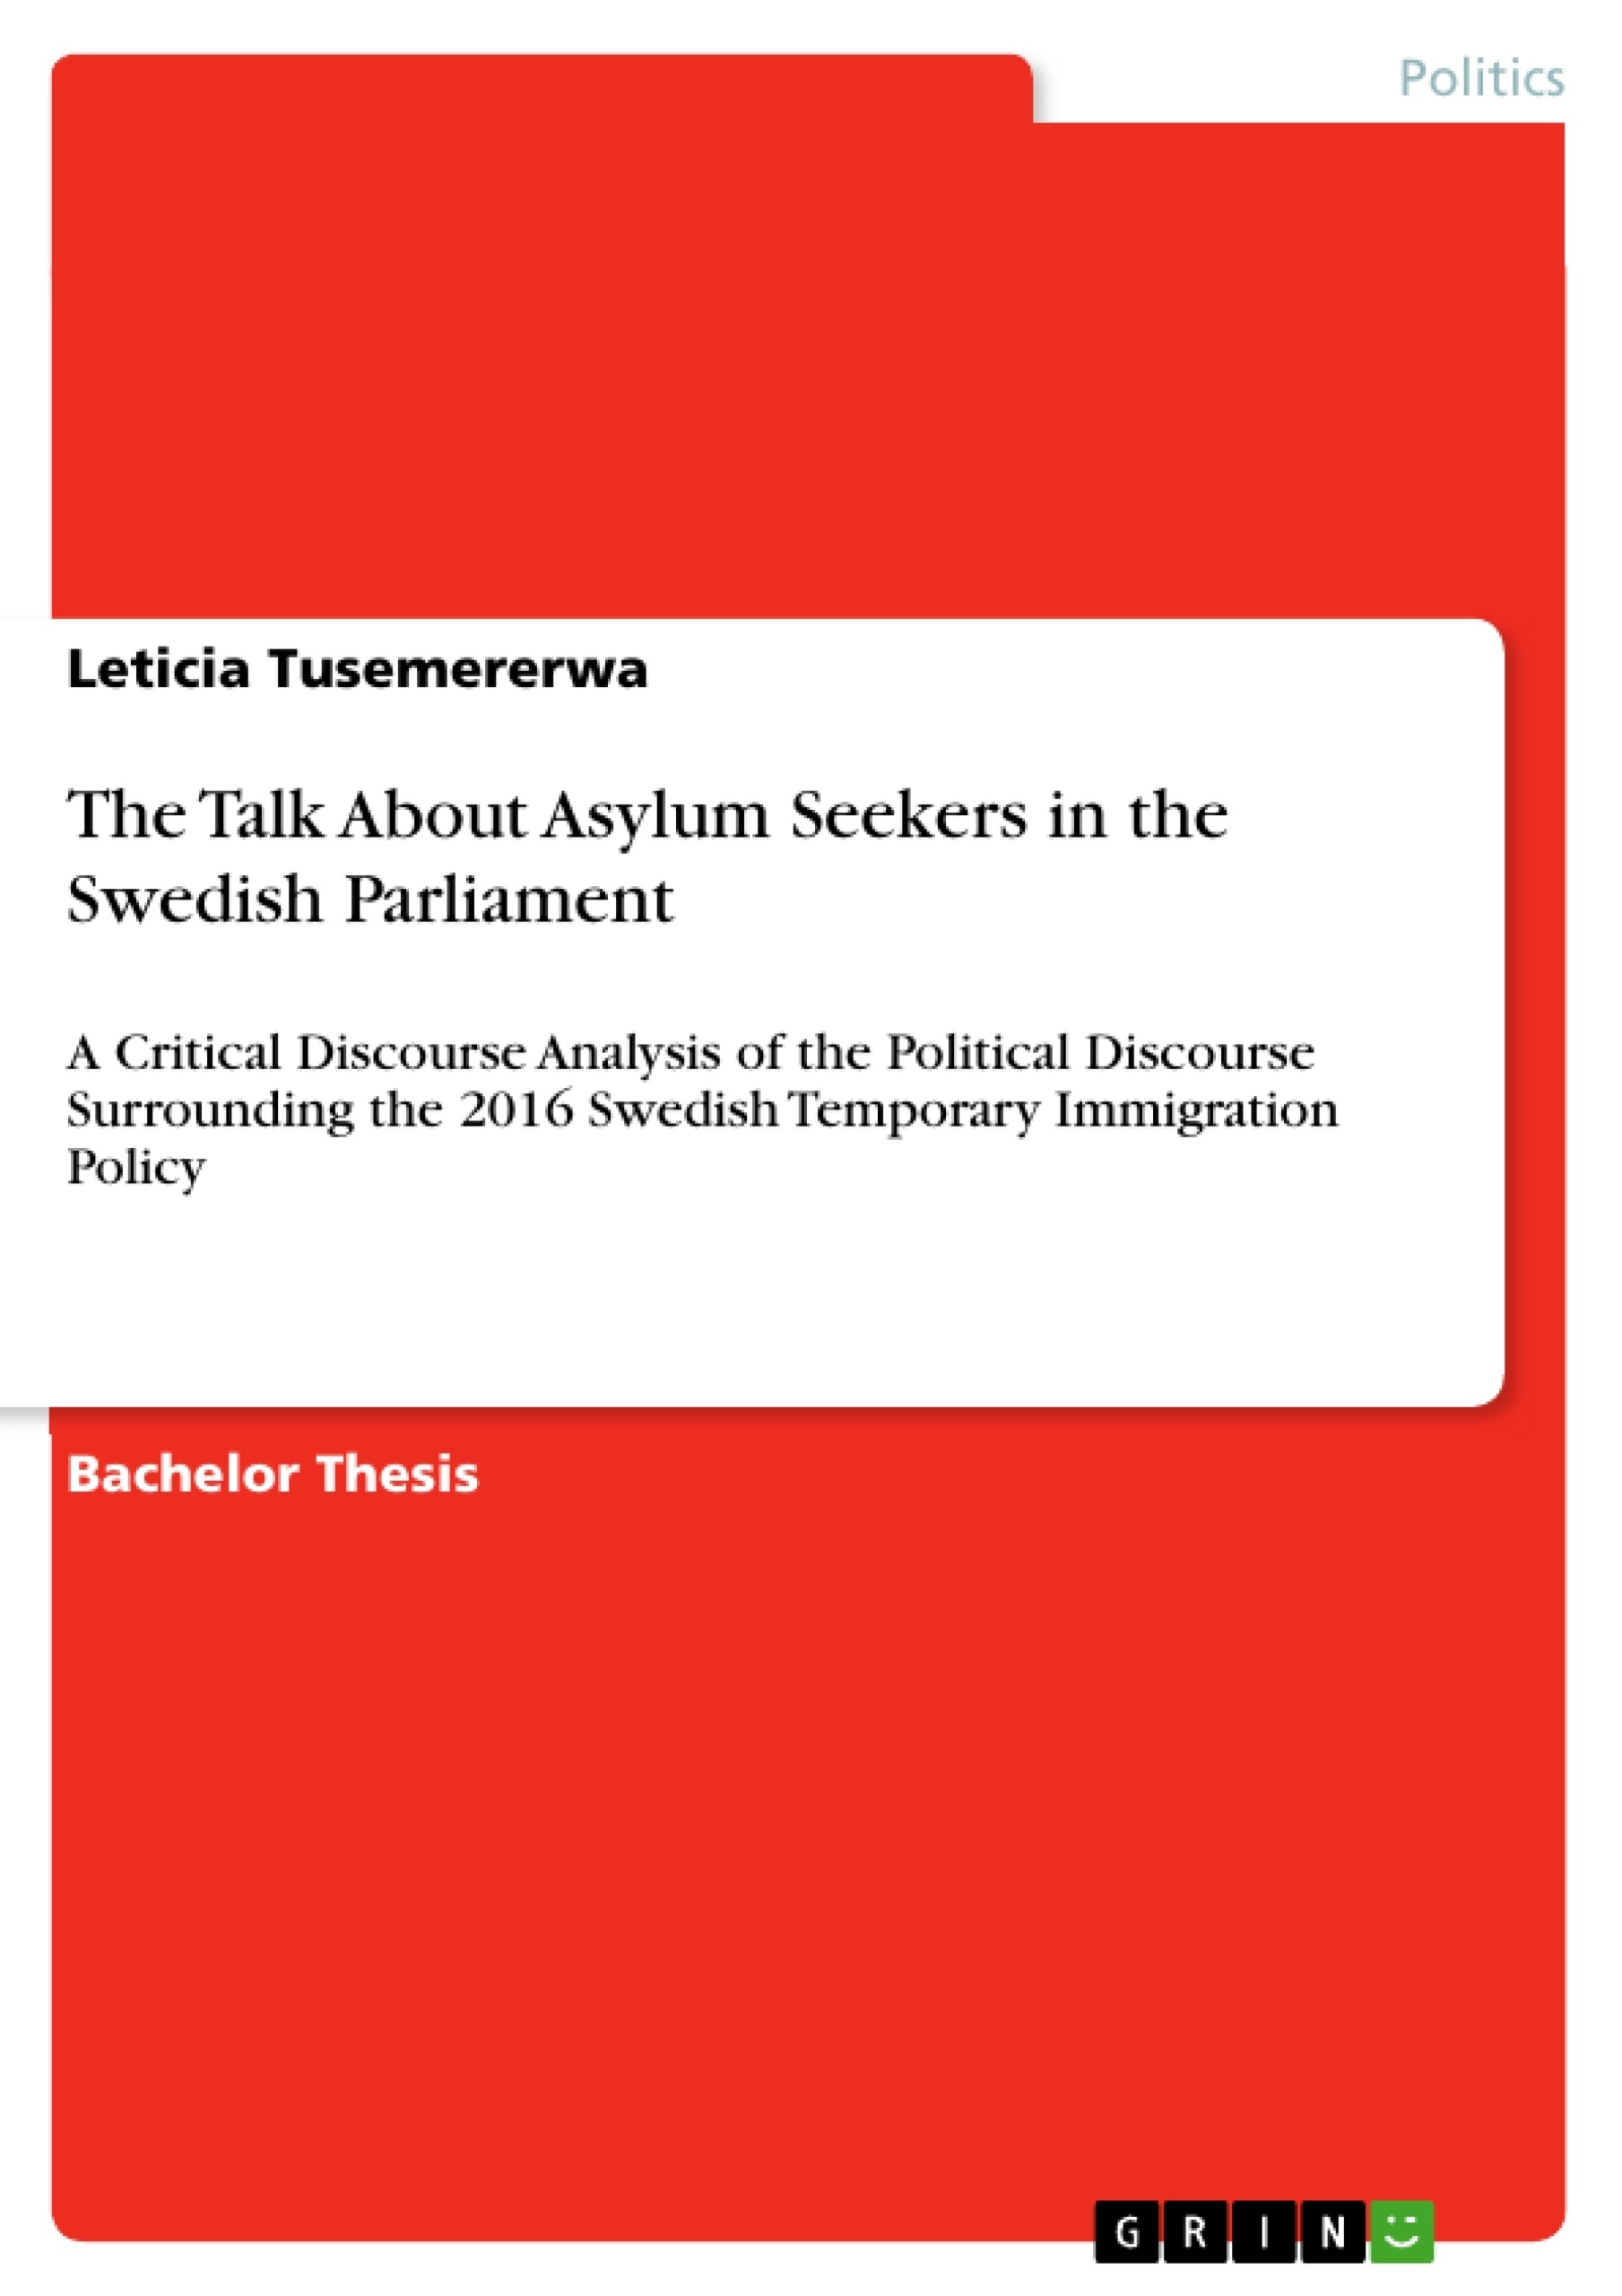 Titel: The Talk About Asylum Seekers in the Swedish Parliament